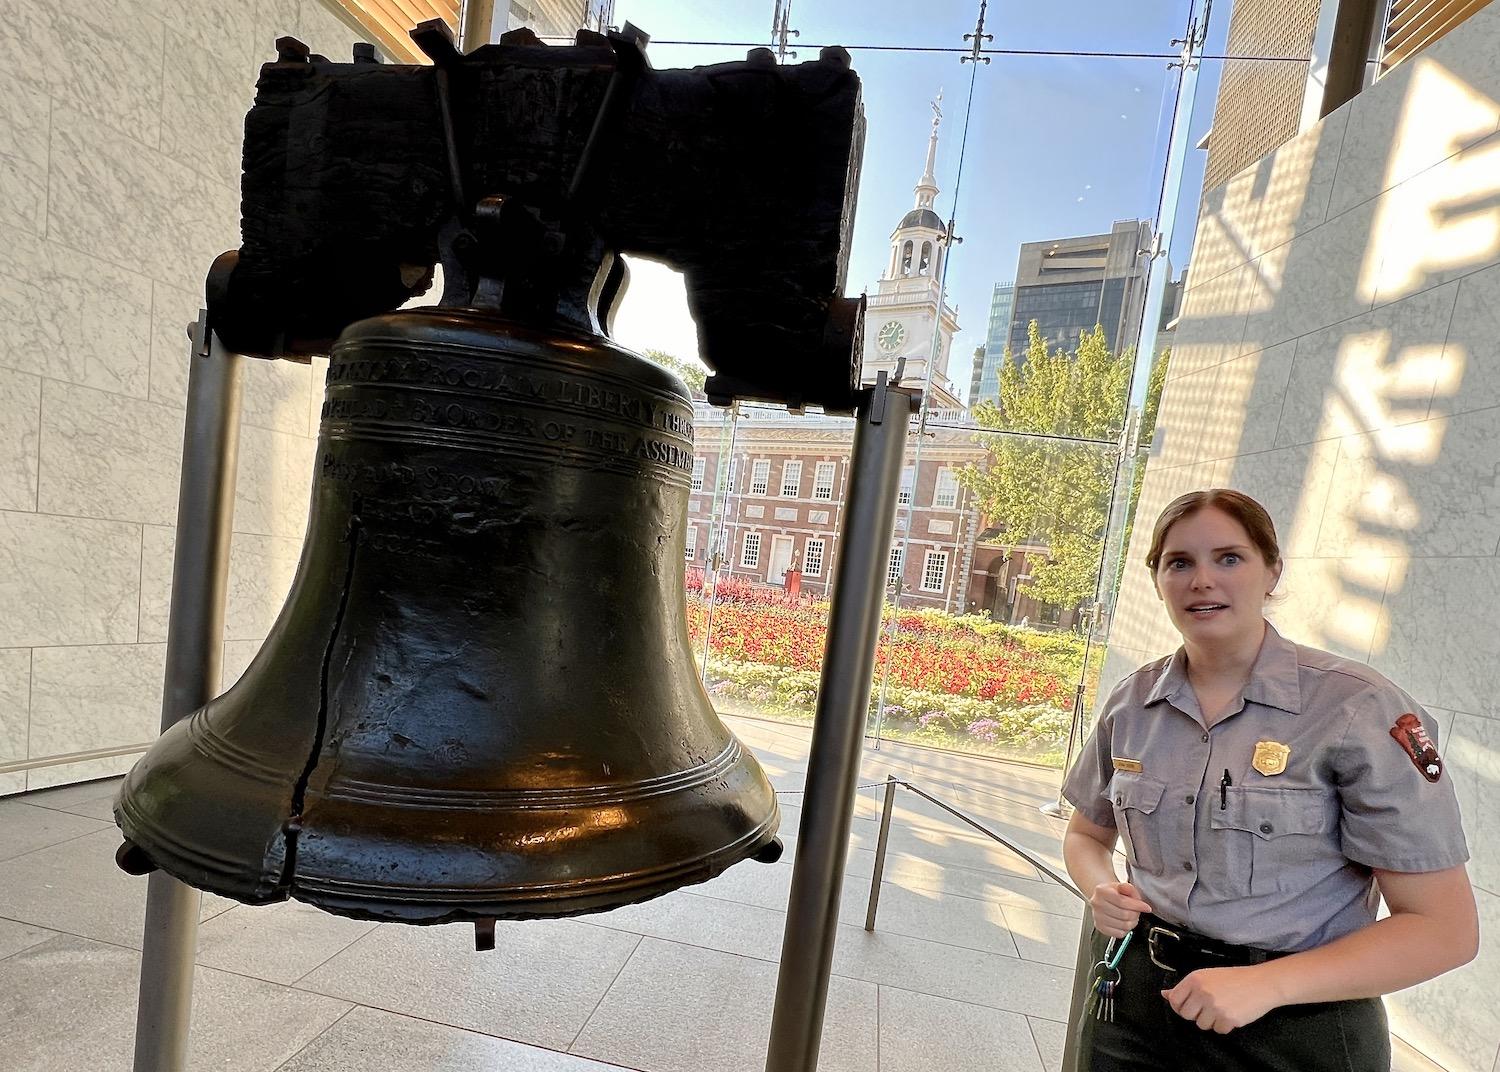 Ranger Anna Godzik shares insights about the Liberty Bell in Philadelphia.